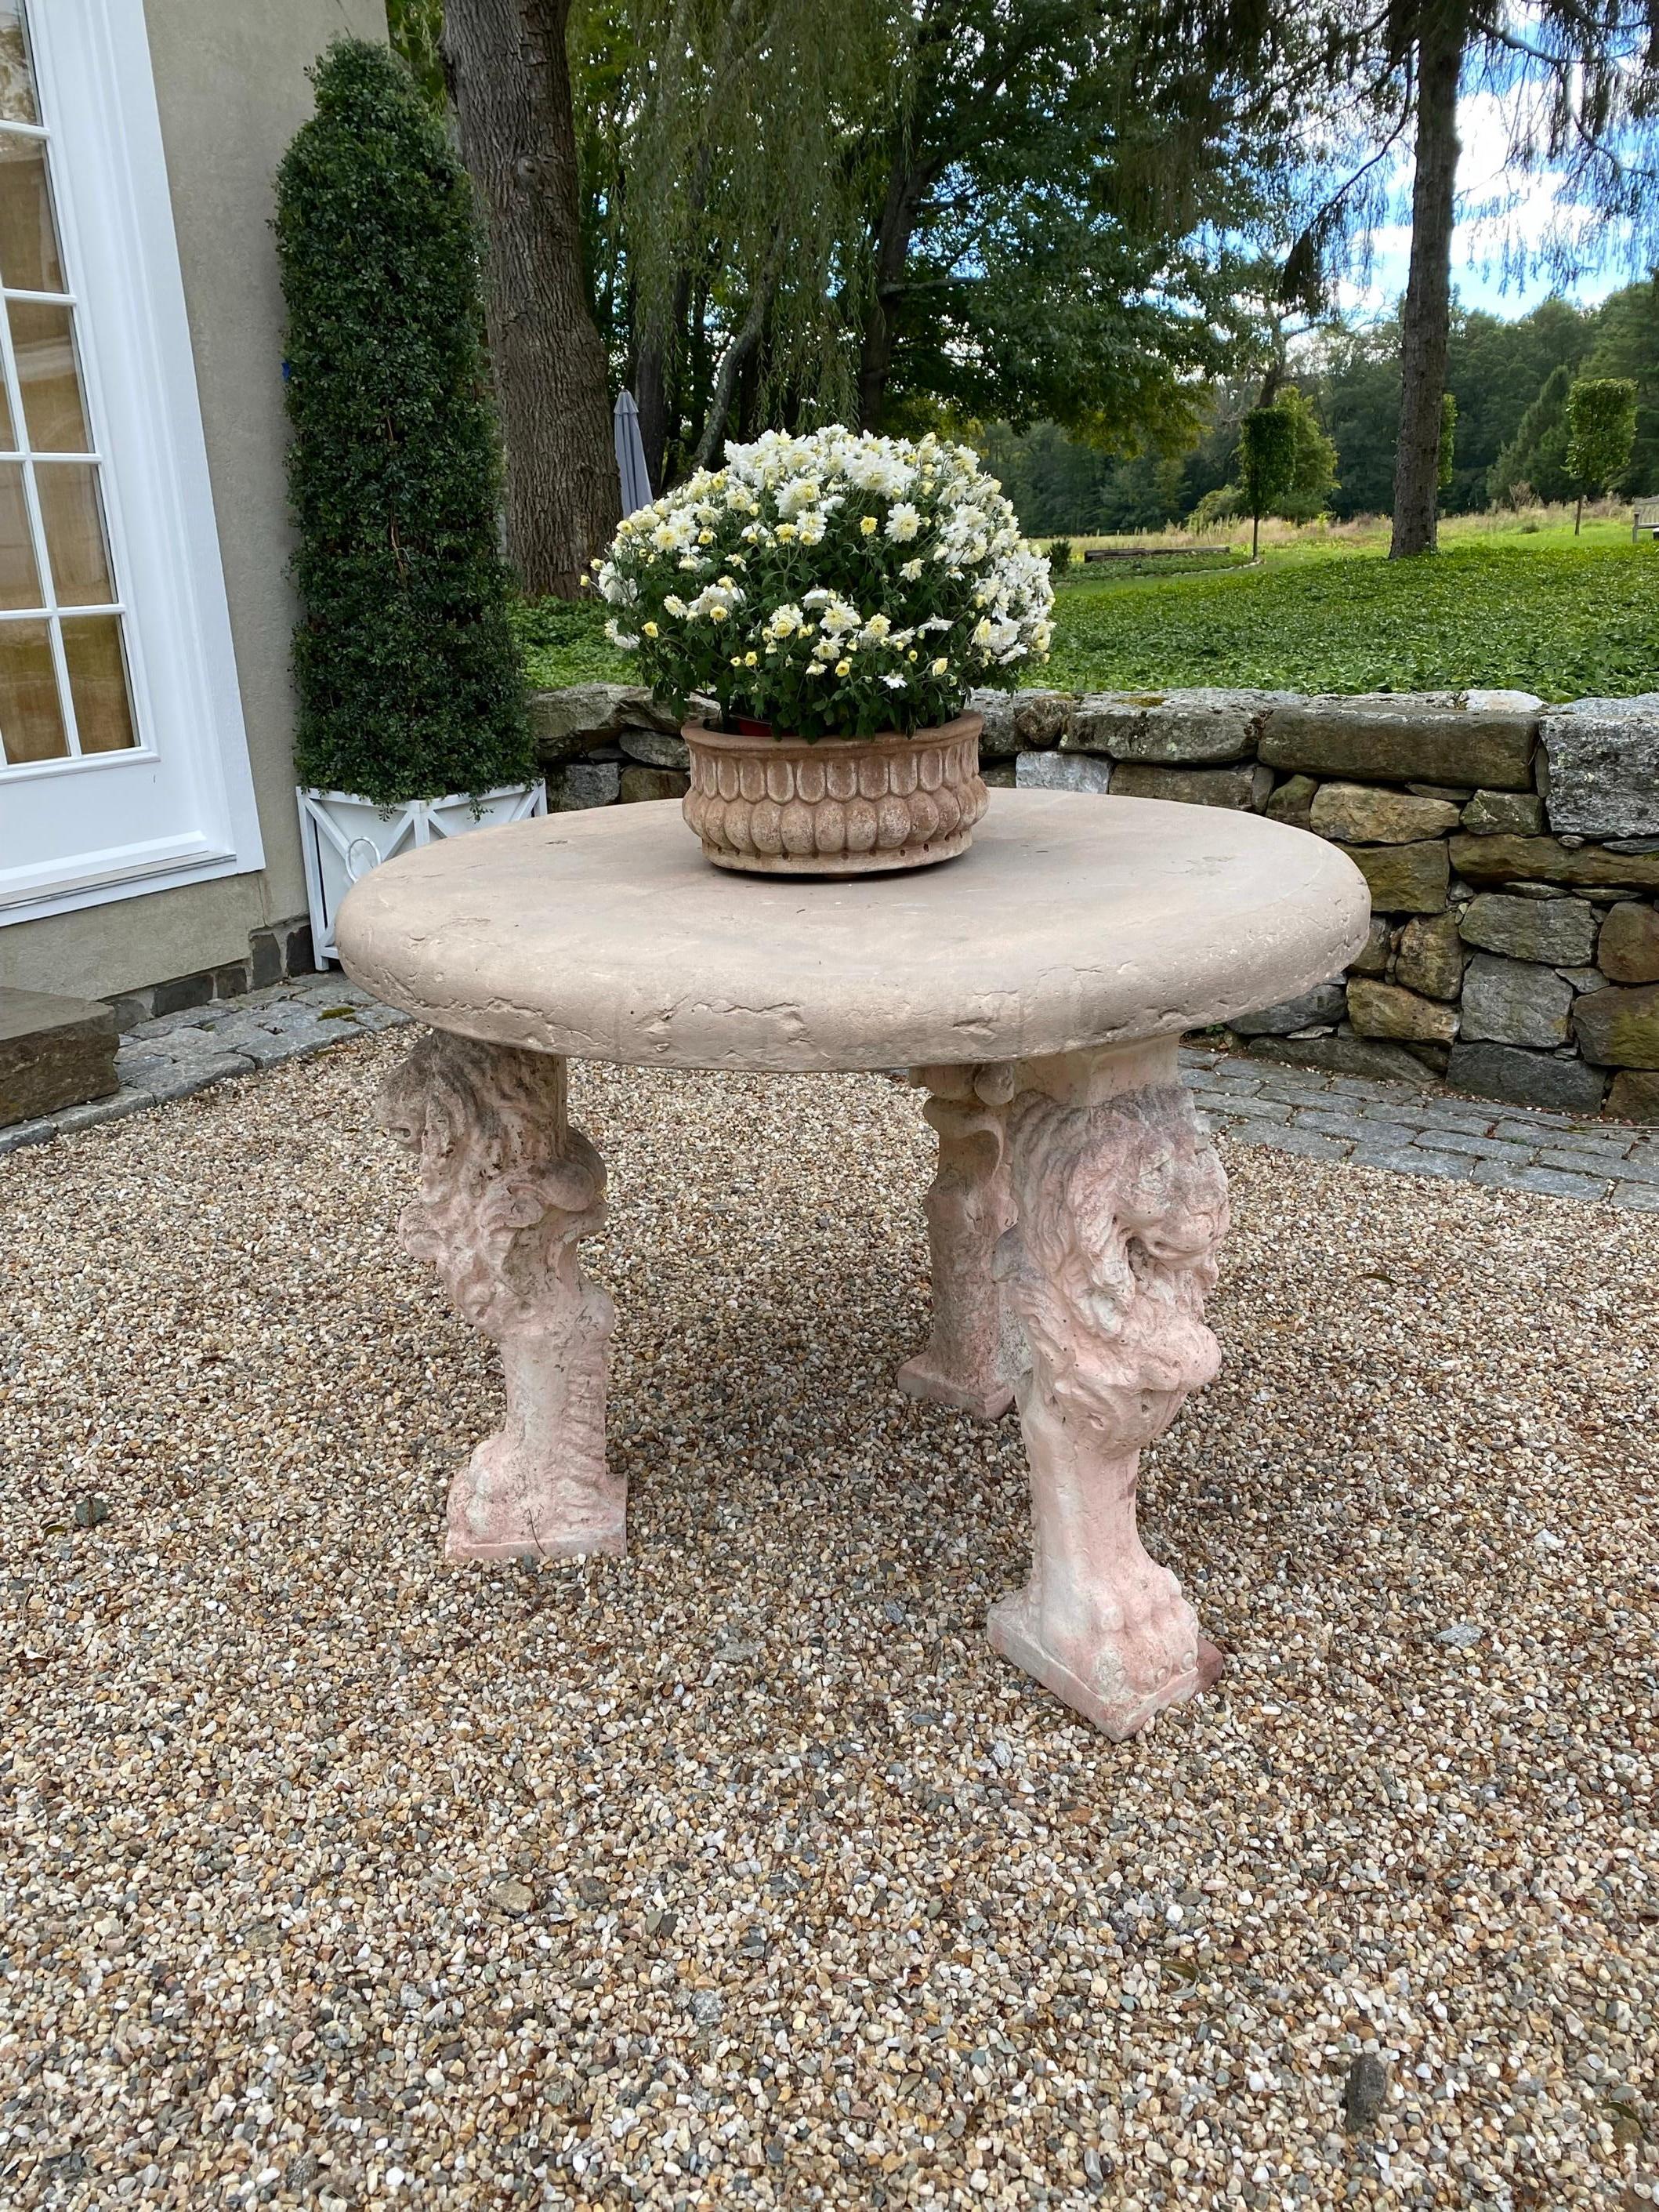 A stately round cast stone table top supported by 3 cast stone lion figured legs. The table has wonderful aged patina and character only time can produce.  be used as a garden sculptural object or an entry foyer center table.
Table shows aged